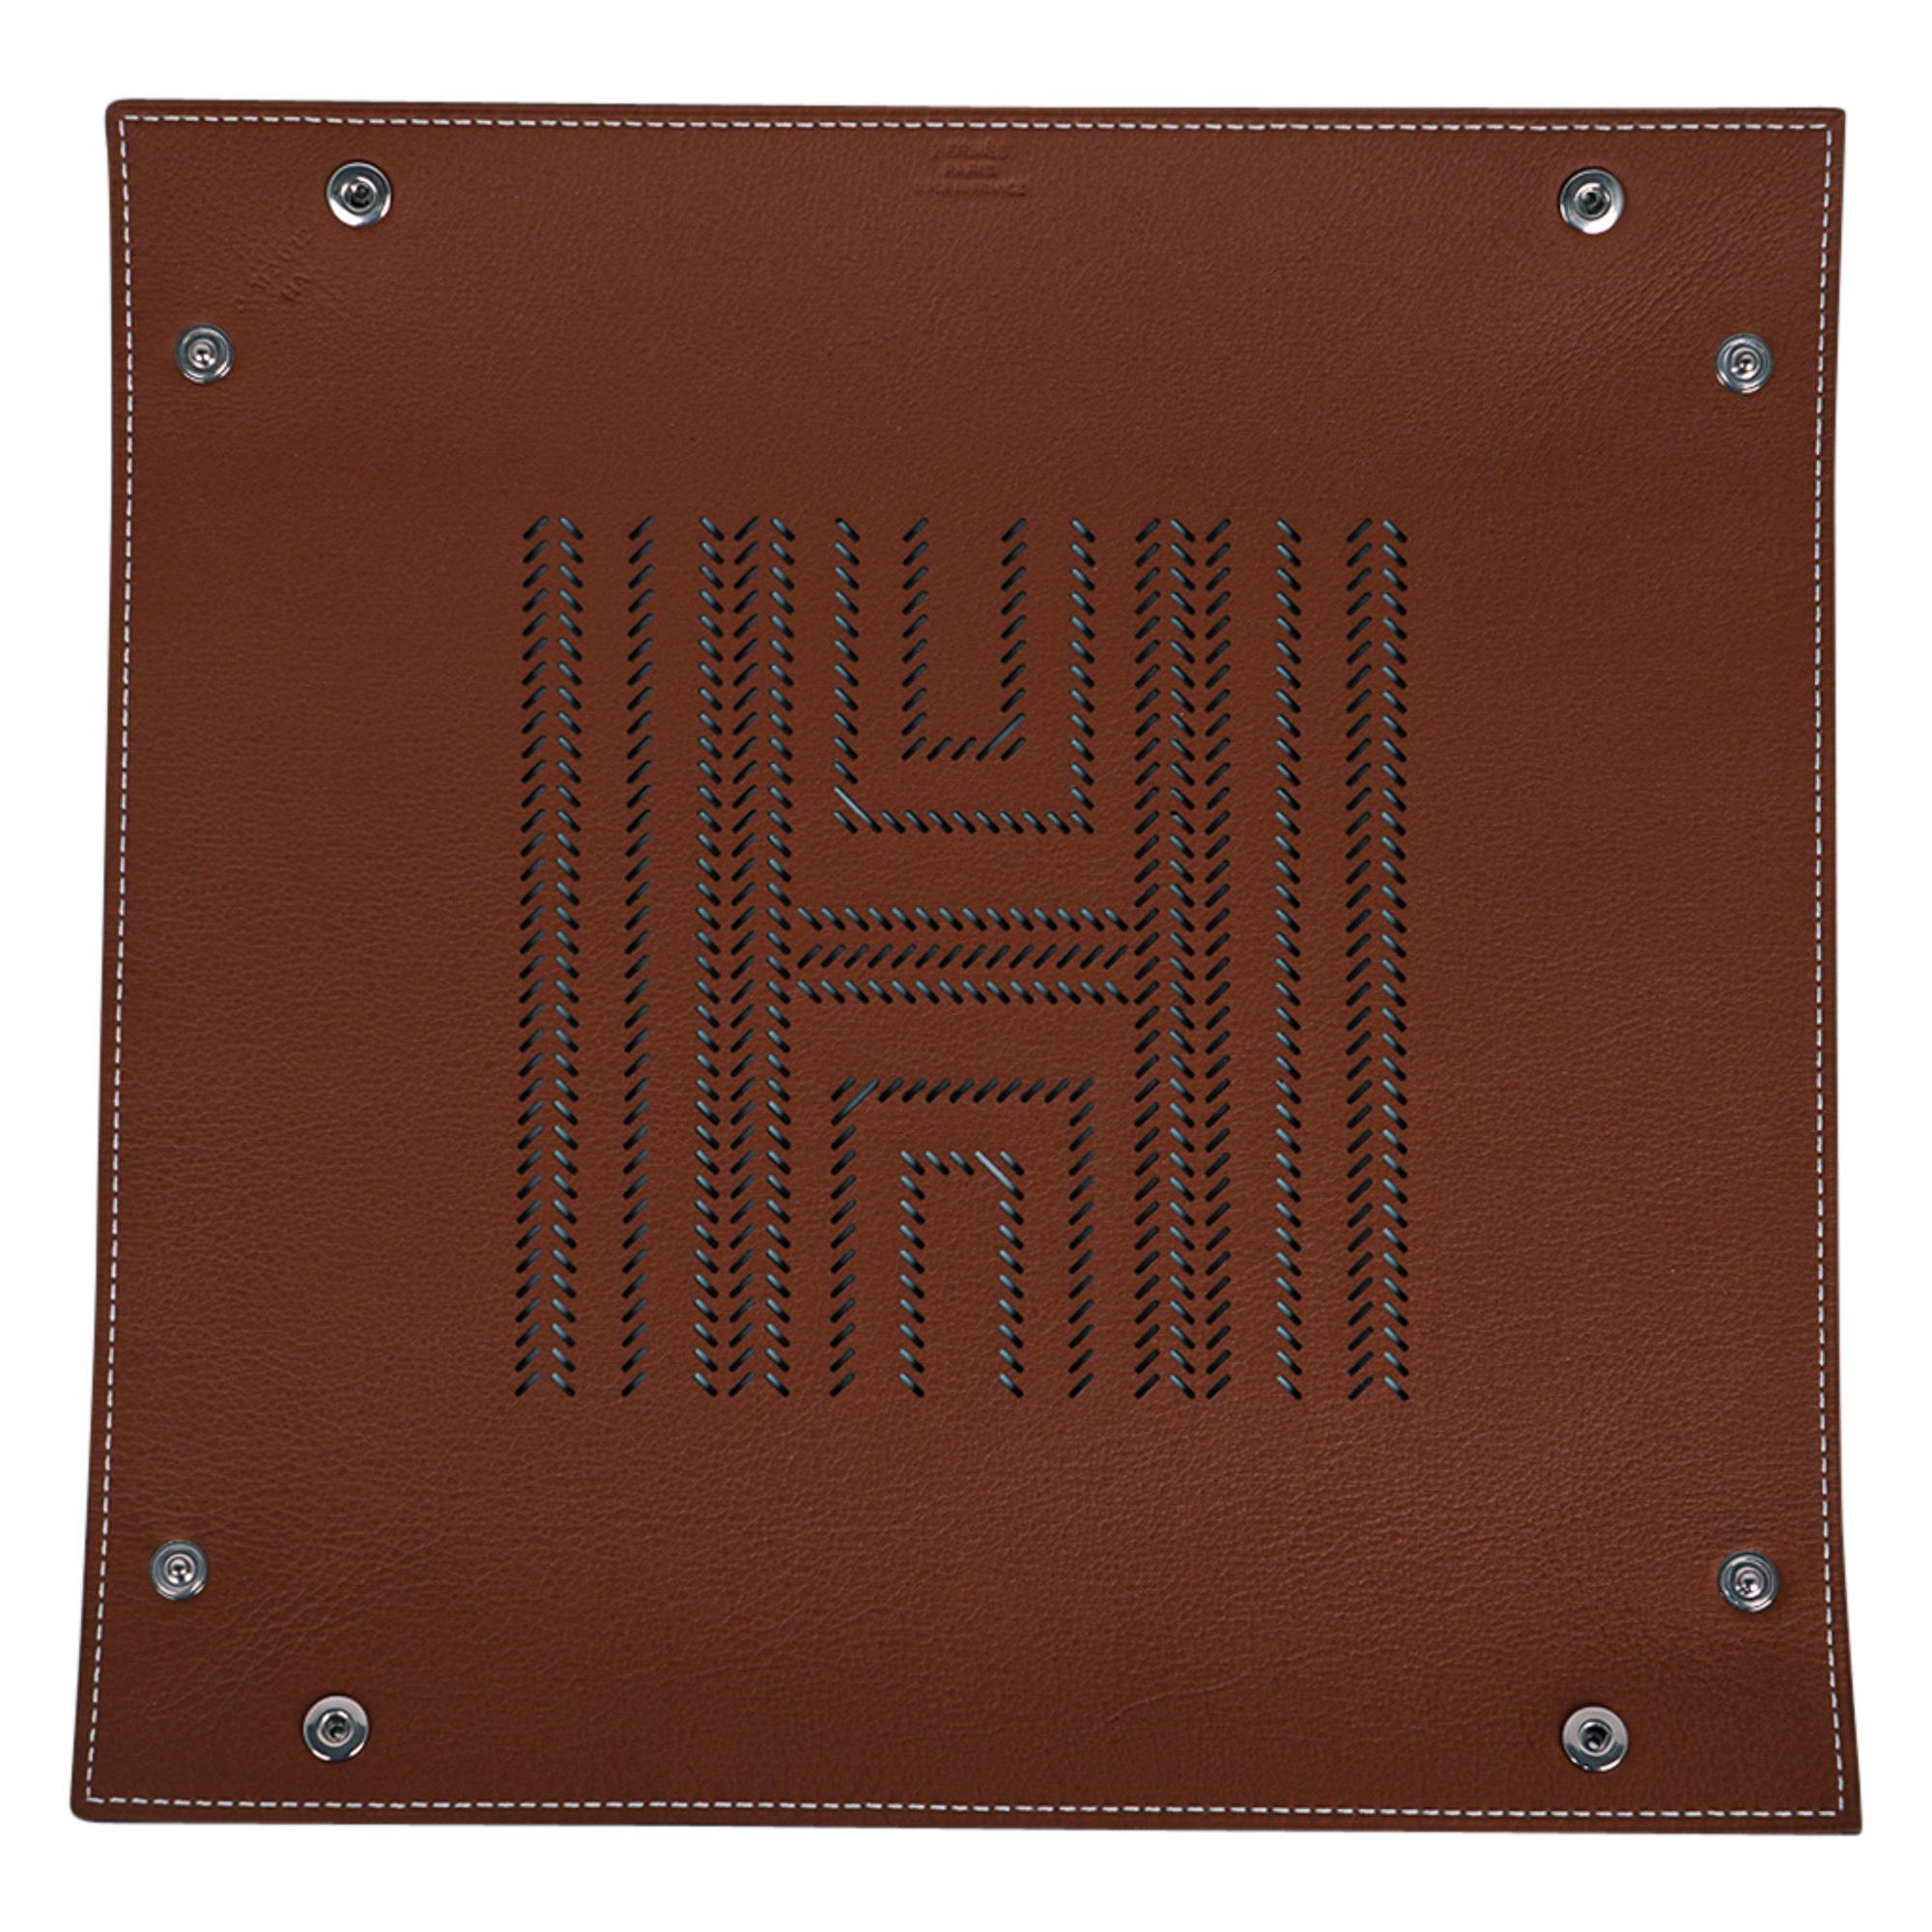 Hermes H Chevrons Mises Et Relances Change Tray Fauve / Ebene New w/Box In New Condition For Sale In Miami, FL